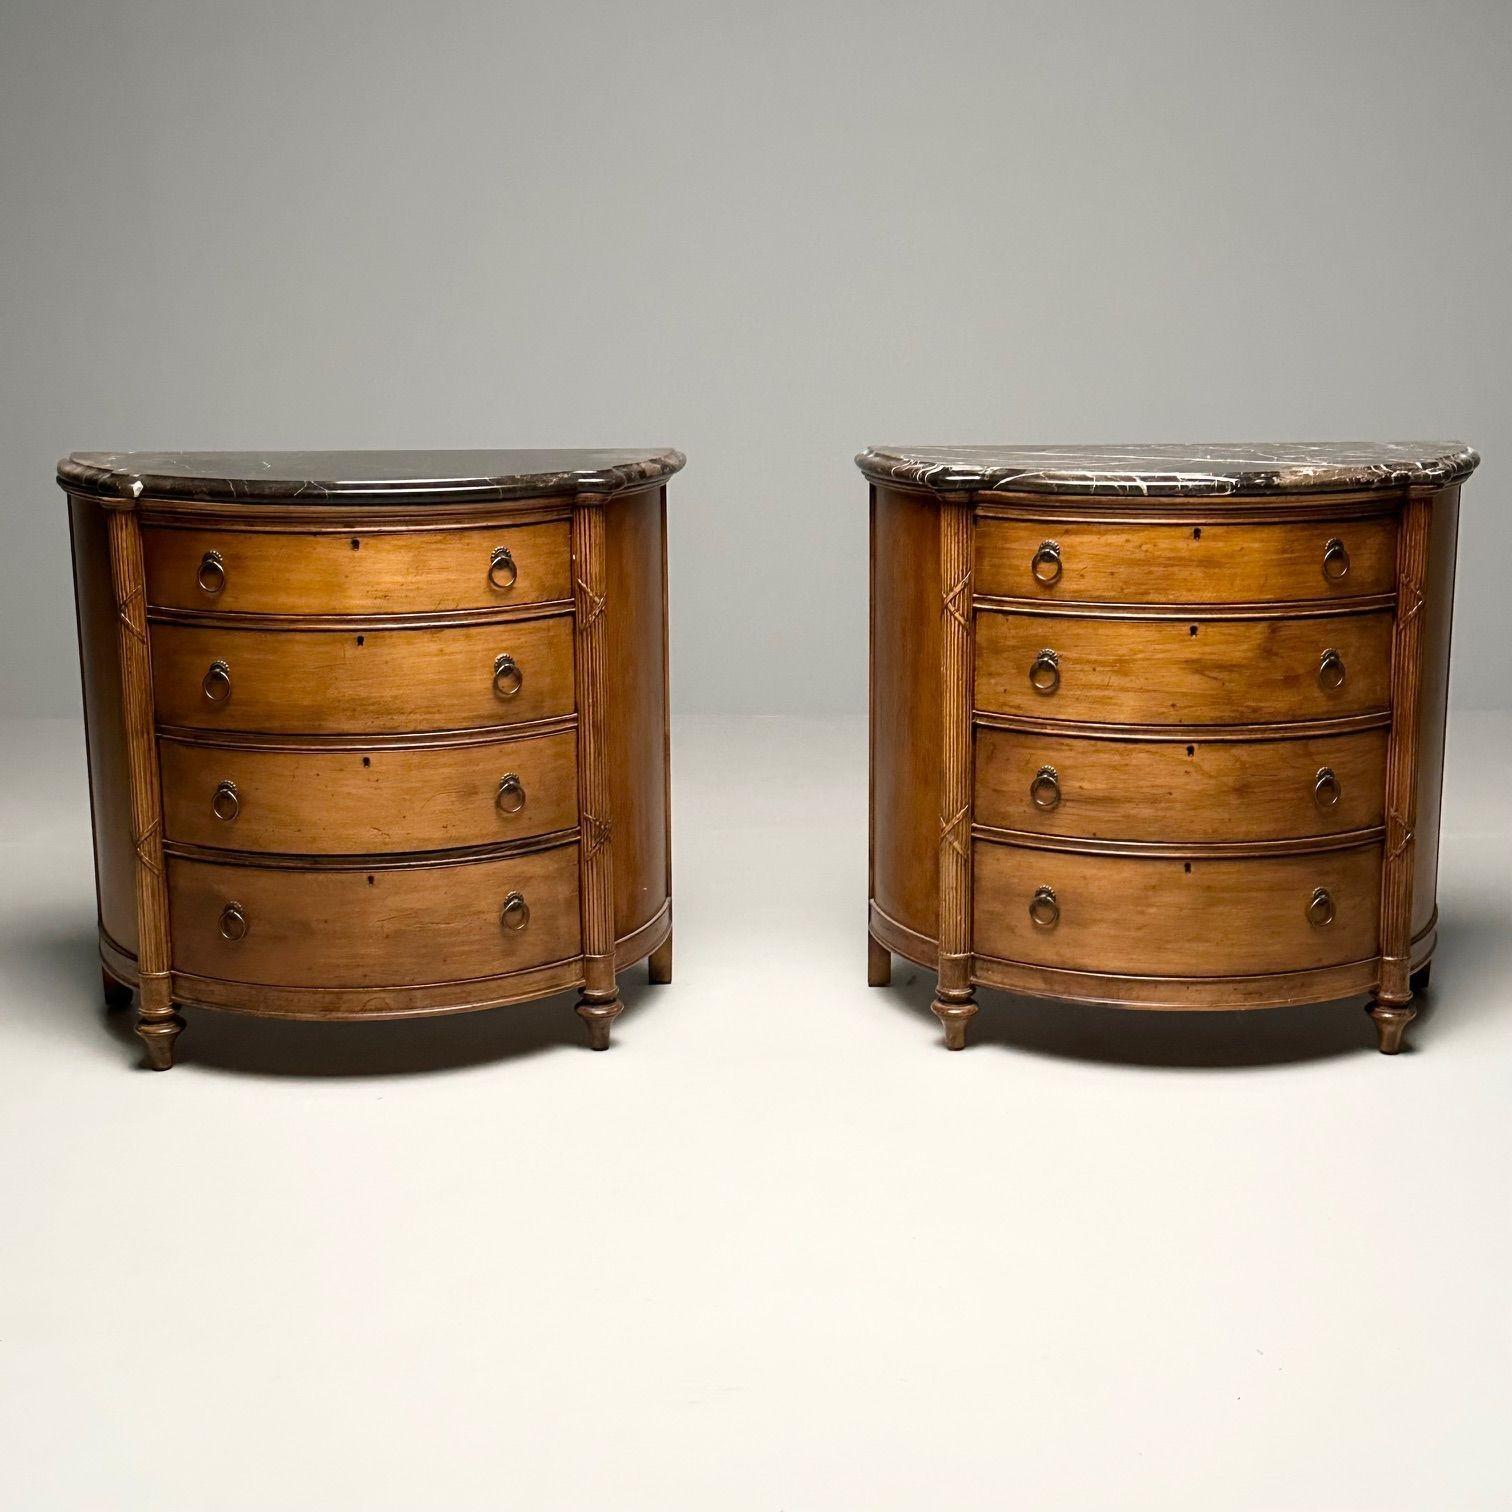 Pair of Regency Style Demilune Commodes / Cabinet, Marble Top, Walnut

Large demi lune commodes or bedside stands in a nicely grained walnut finish with marble tops. The pair having four drawers with brass pulls. Priced well below market value. Good